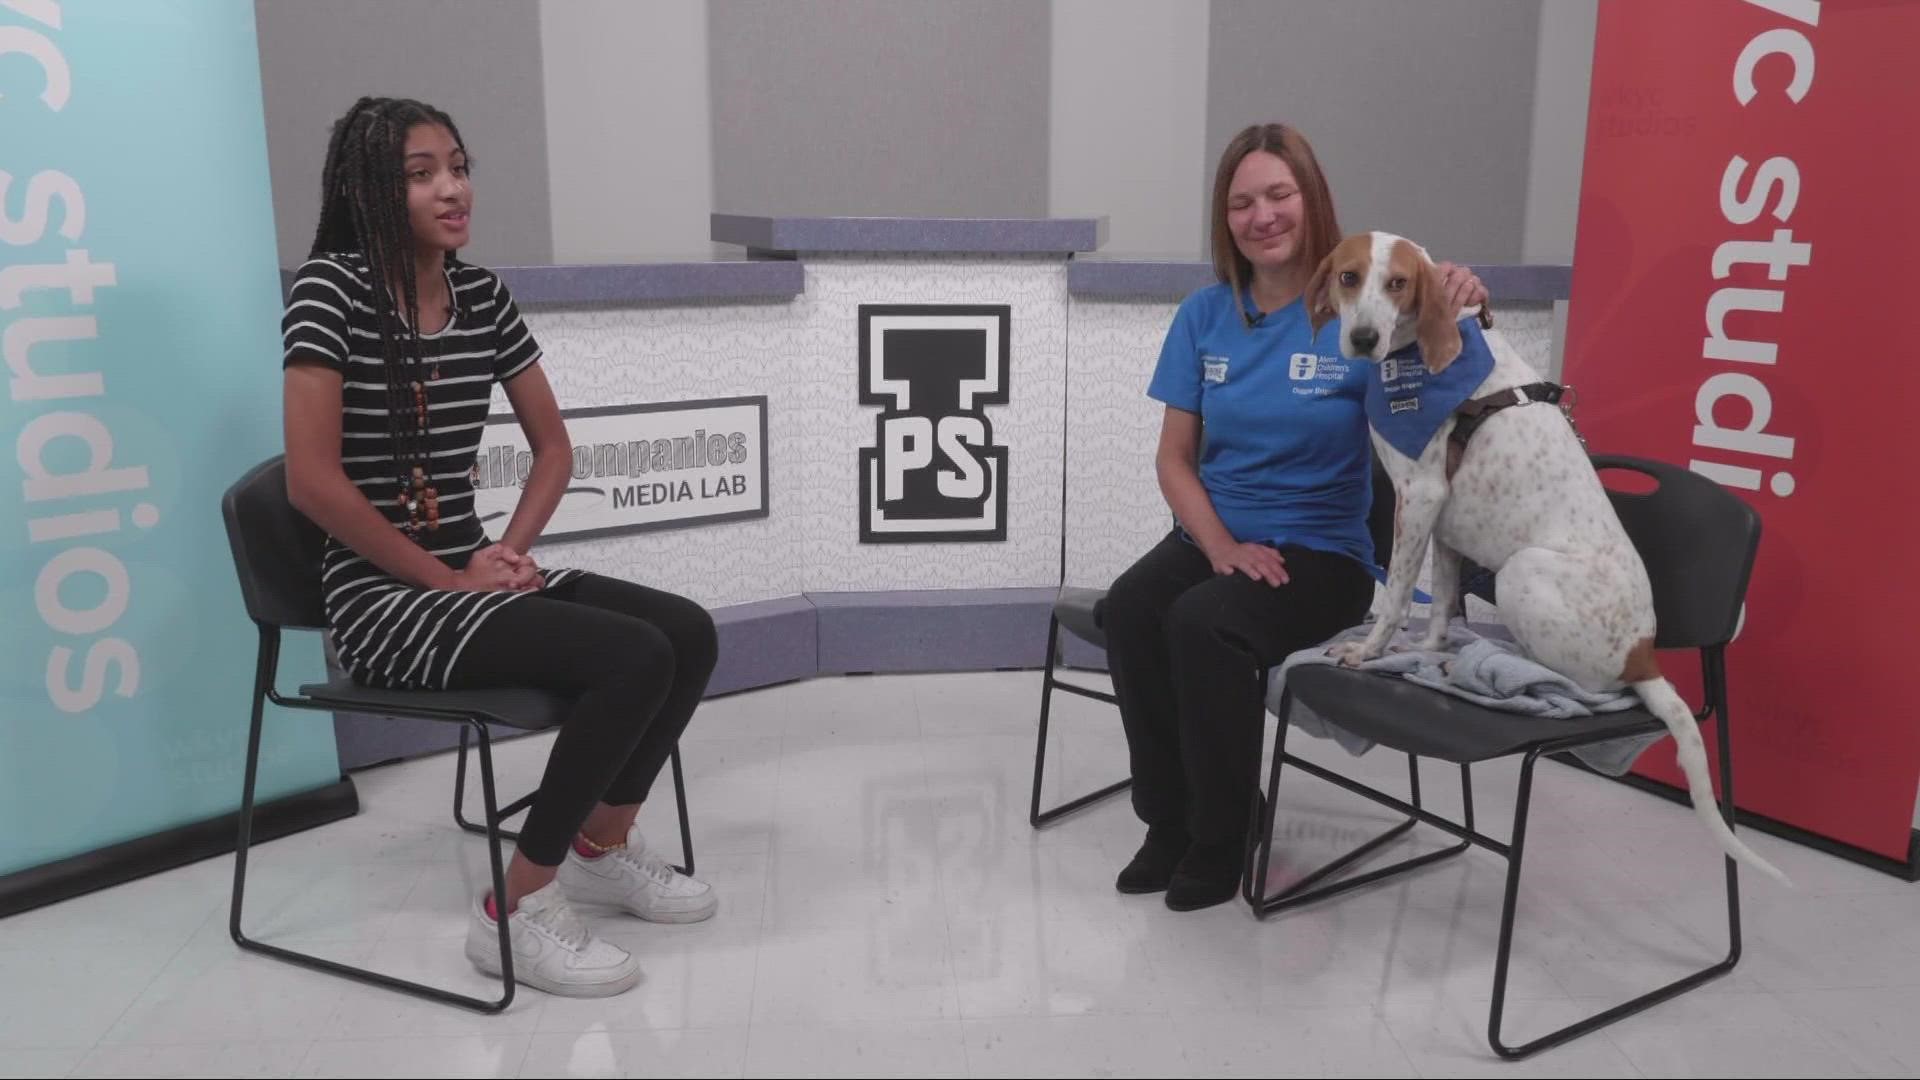 Seventh grade reporter Aliza Blair got the scoop on how dog owners can share the joy of pet ownership with others who could use a smile.